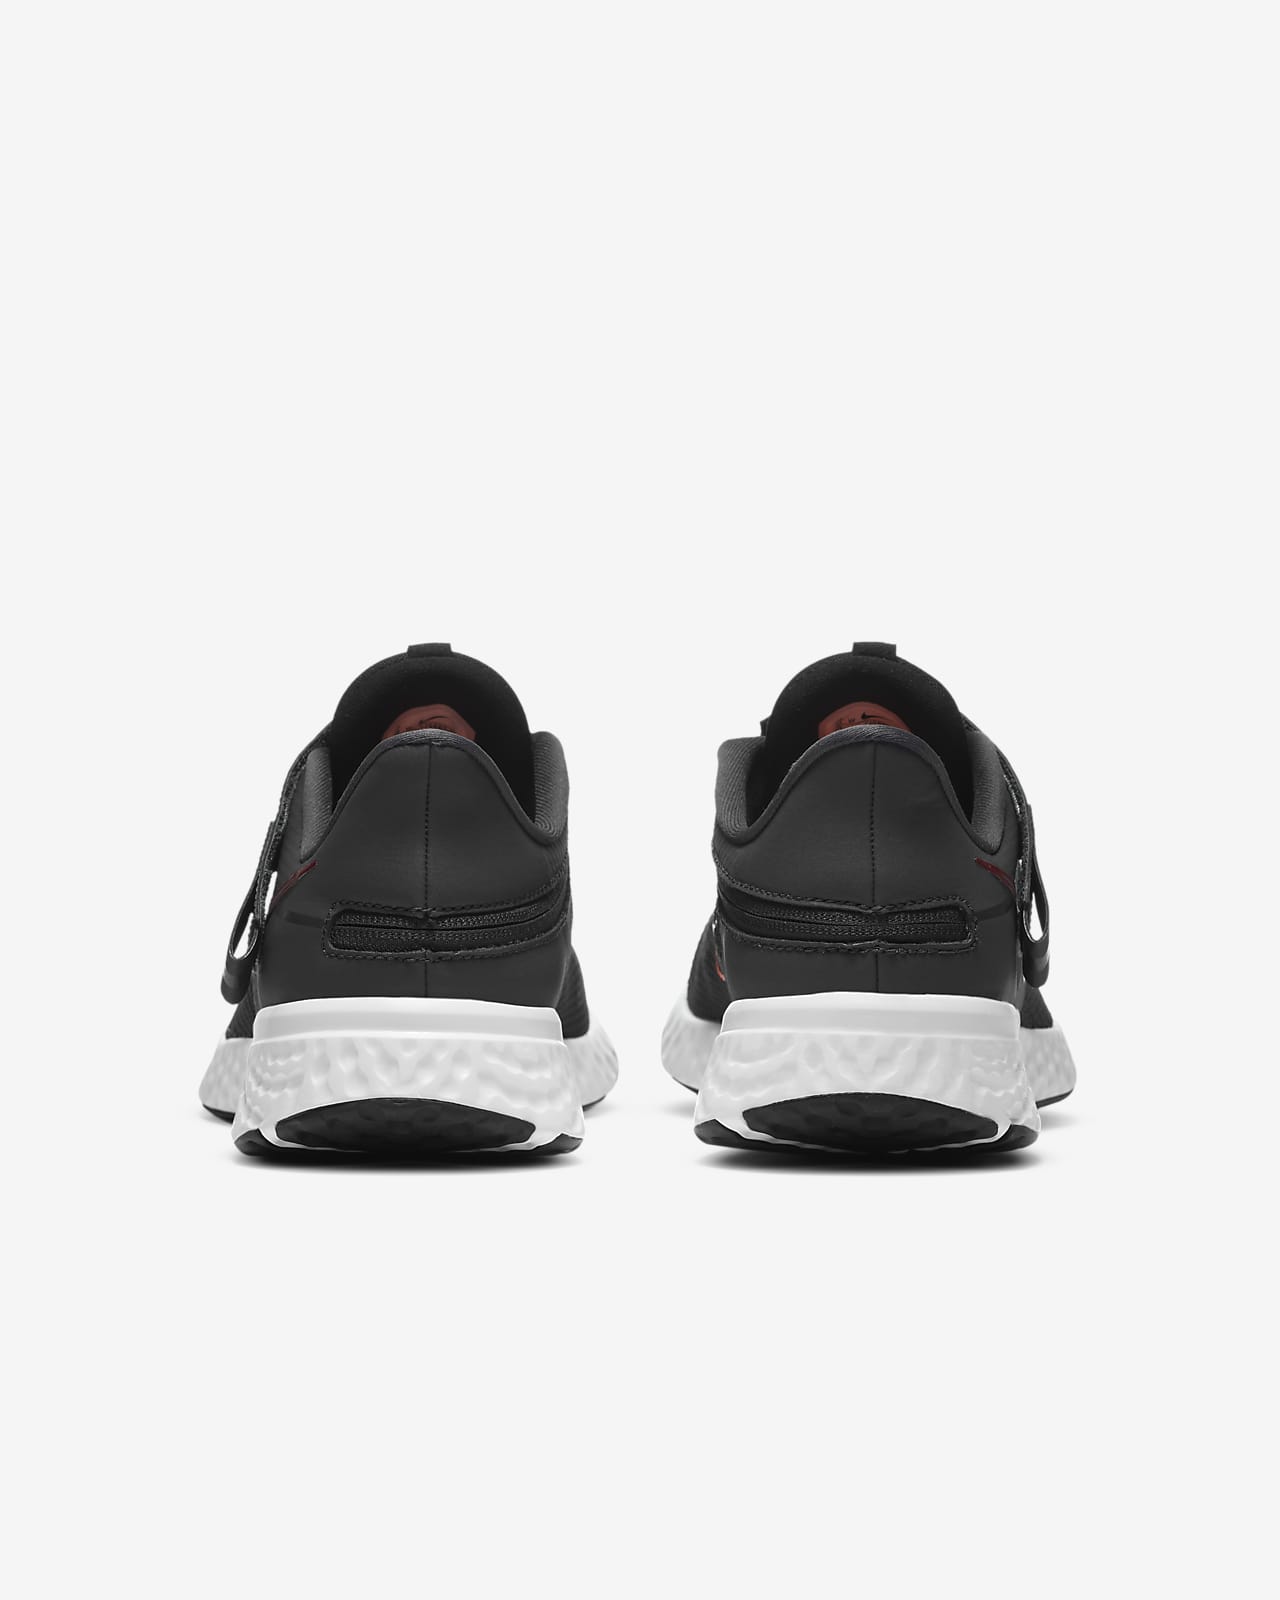 nike extra wide running shoes